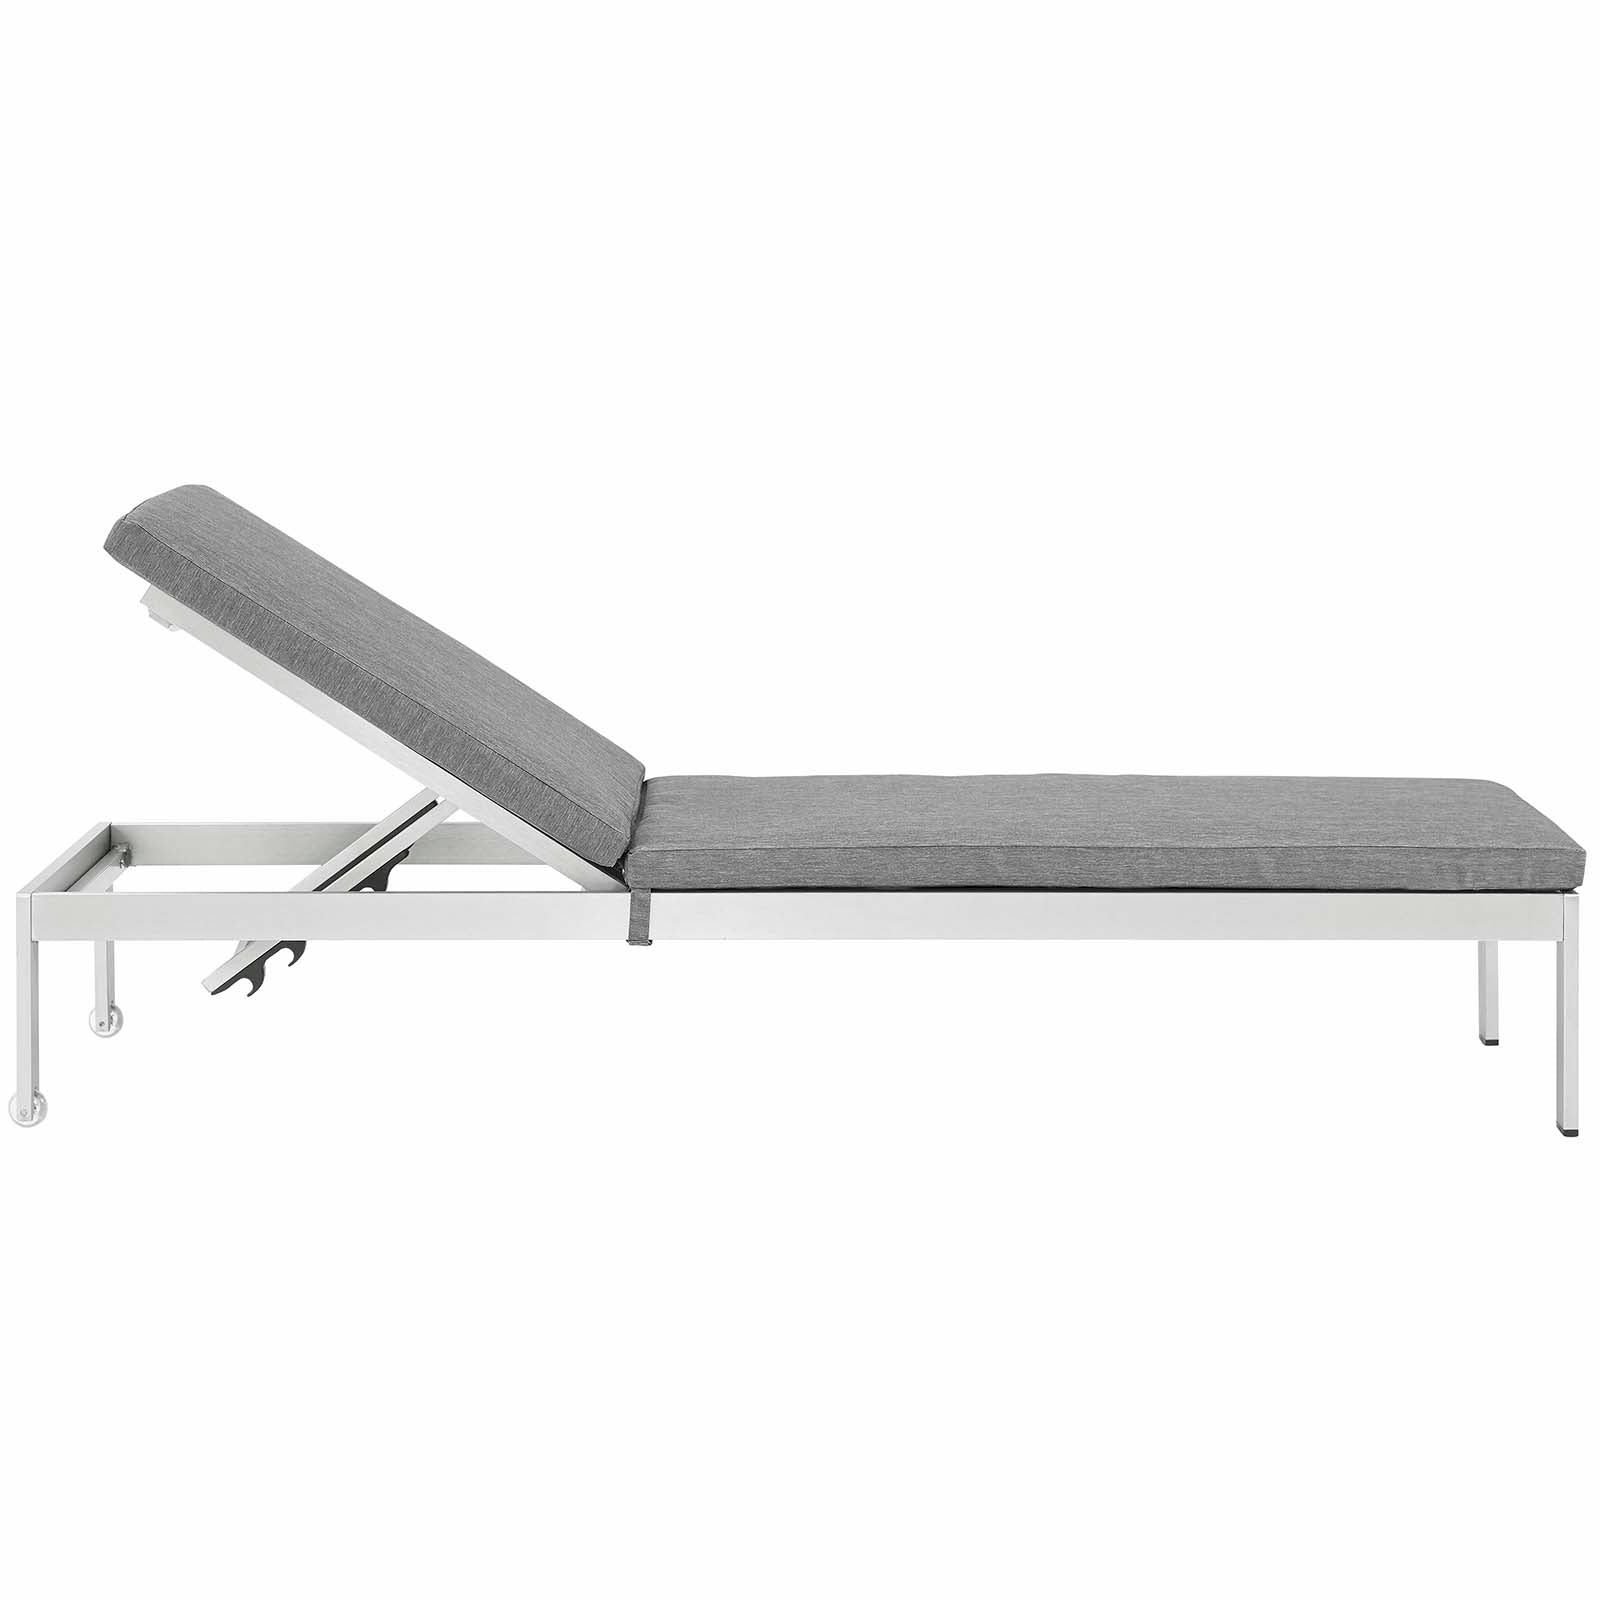 Modway - Shore 3 Piece Outdoor Patio Aluminum Chaise with Cushions - EEI-2736